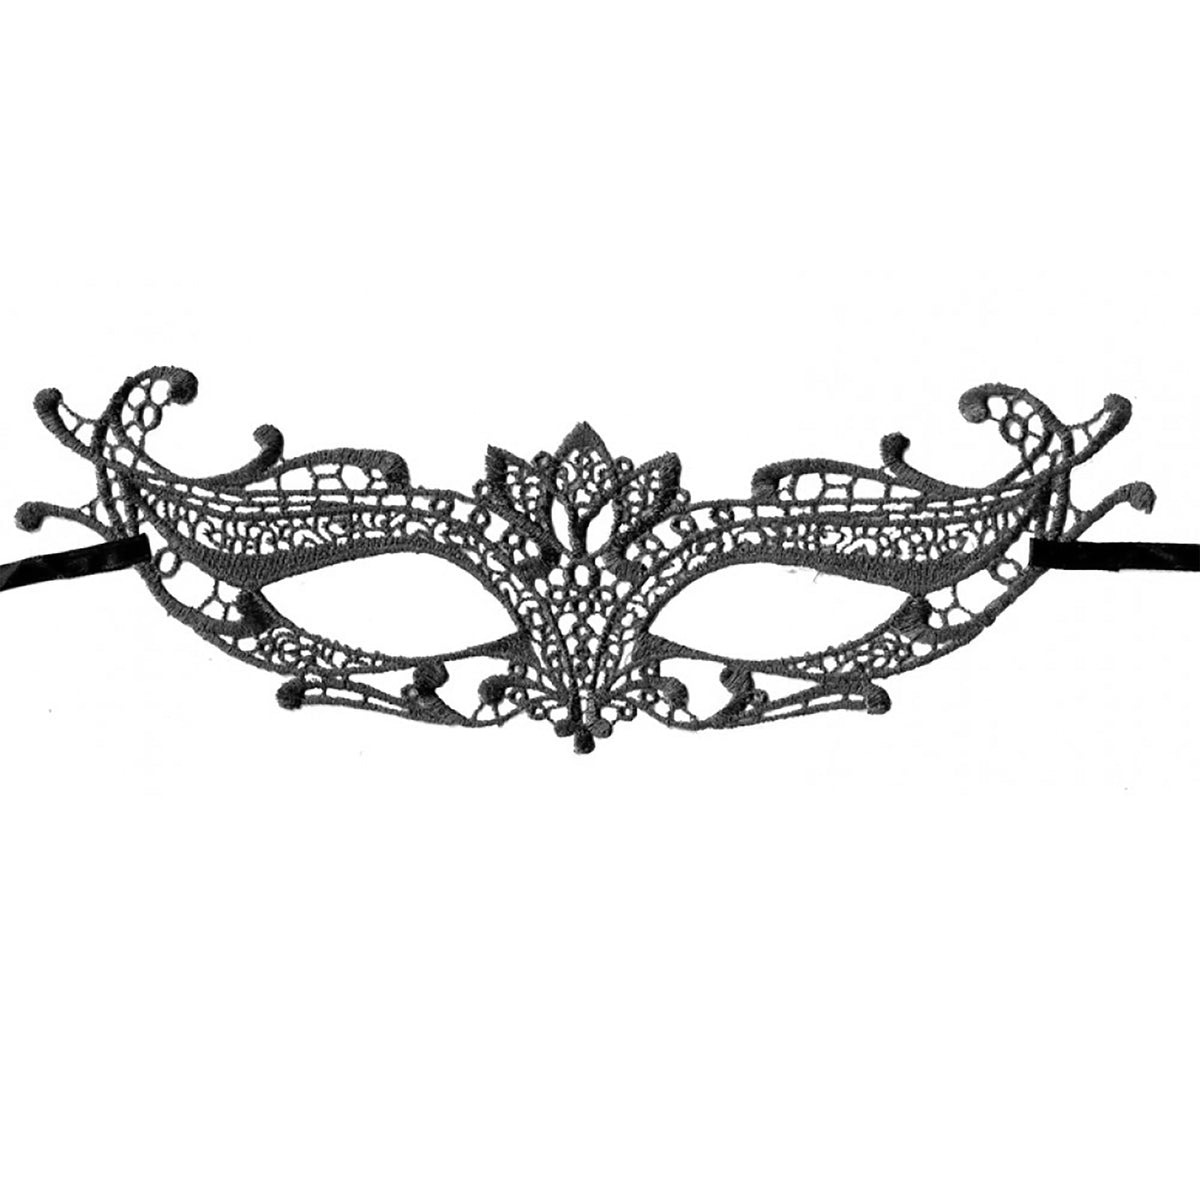 KBW GLOBAL CORP Costume Accessories Brocade Lace Eye mask , 1 Count